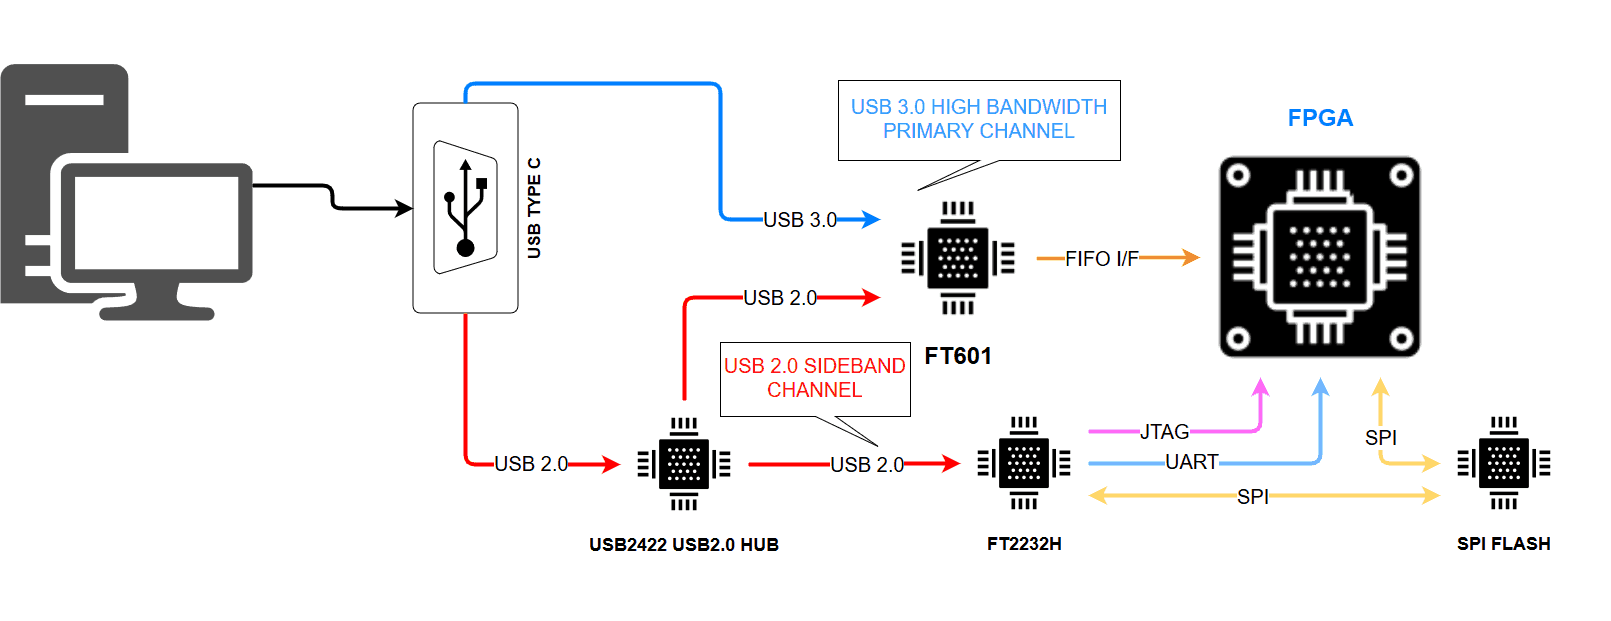 Figure 3 - A proposed USB3.0 Host Interface Solution using FT601